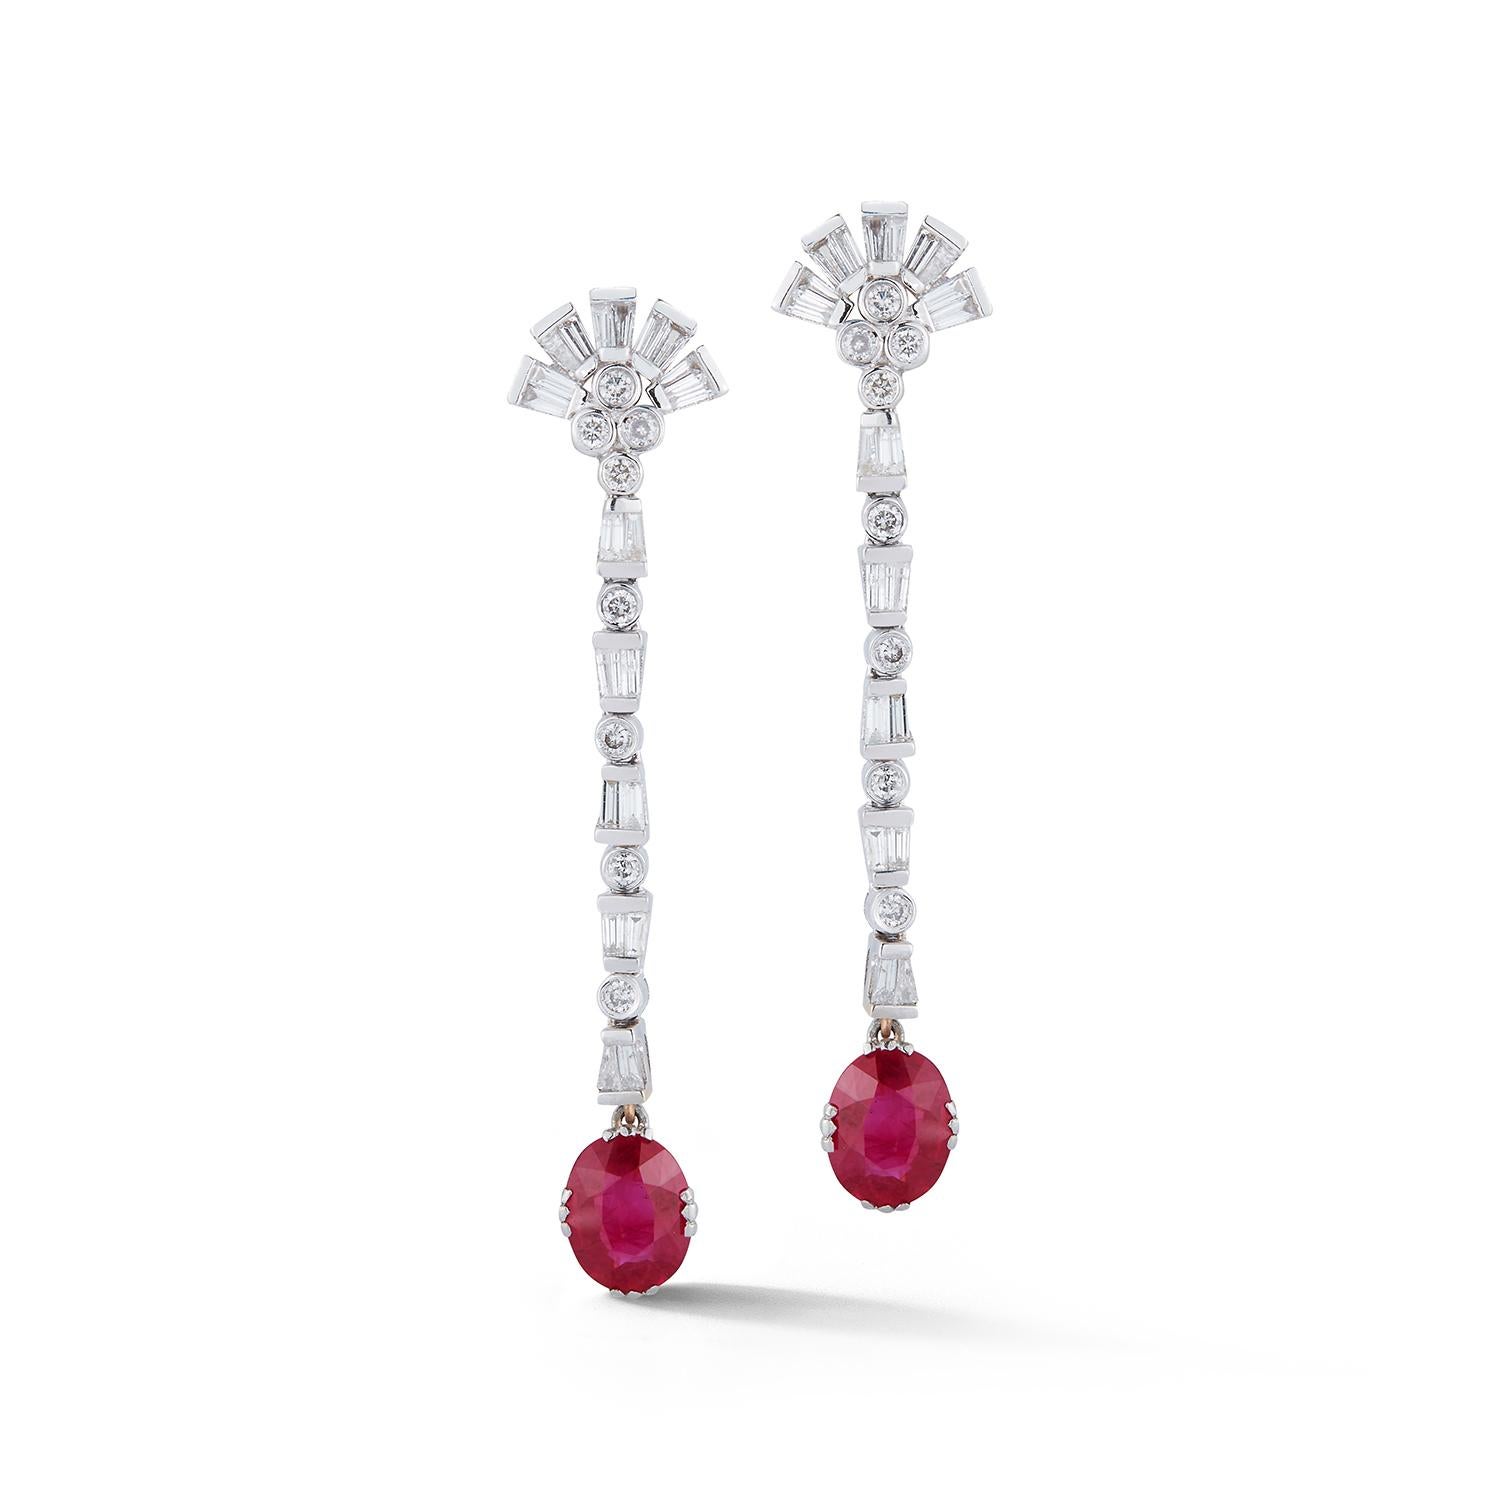 Certified Burmese Ruby & Diamond Dangle Earrings
2 oval cut rubies approximately 3.93 cts certified by AGL laboratory as Burmese origin
16 round cut diamonds & 40 baguettes approximately 1.80 cts
18k white gold.
Back Type: Clip On with post